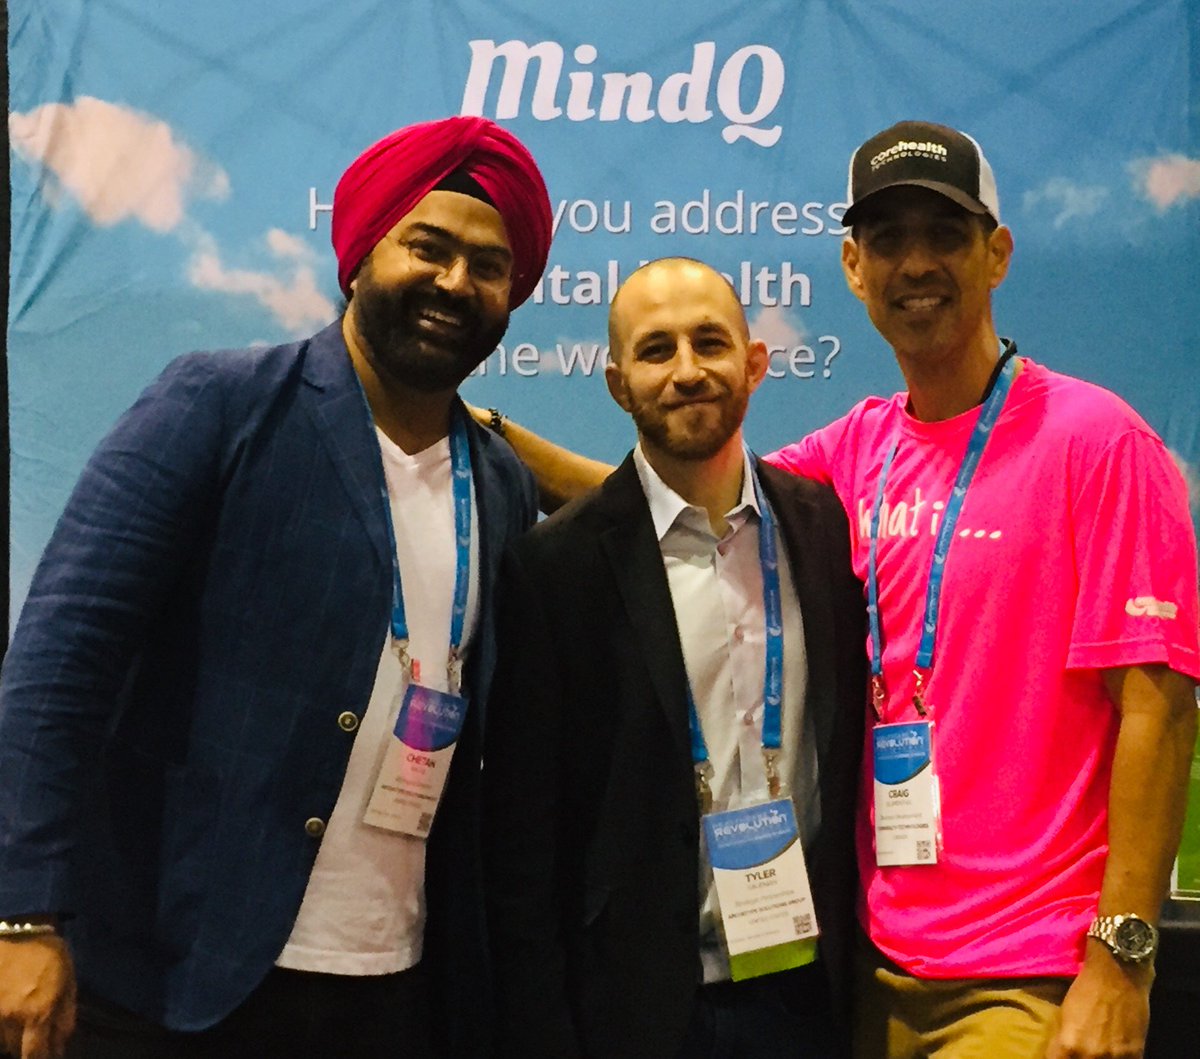 CoreHealth's Wellbeing Solution Sensei Craig Blumenthal with network partner MindQ hanging out at the @HREVconference #HREV18